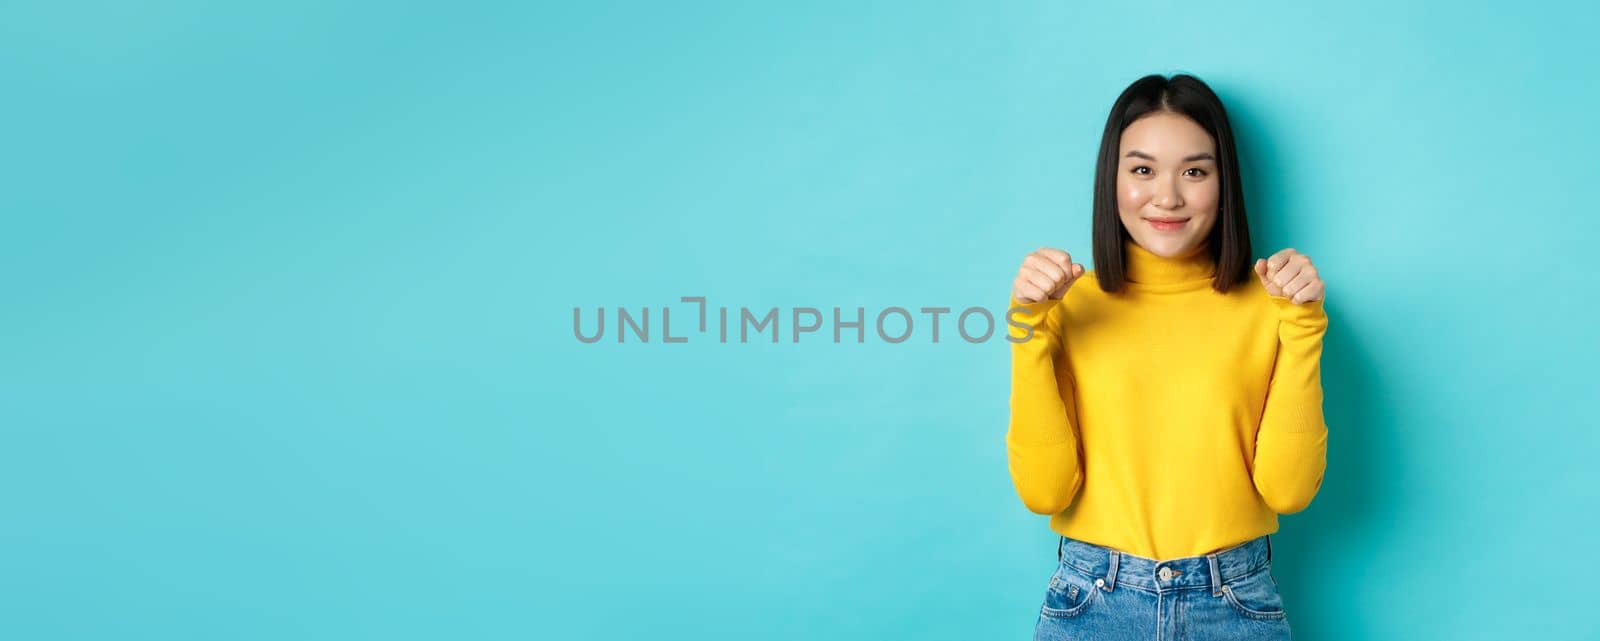 Beauty and fashion concept. Beautiful and stylish asian woman in yellow pullover, holding hands raised near chest as if holding banner or logo, standing over blue background.